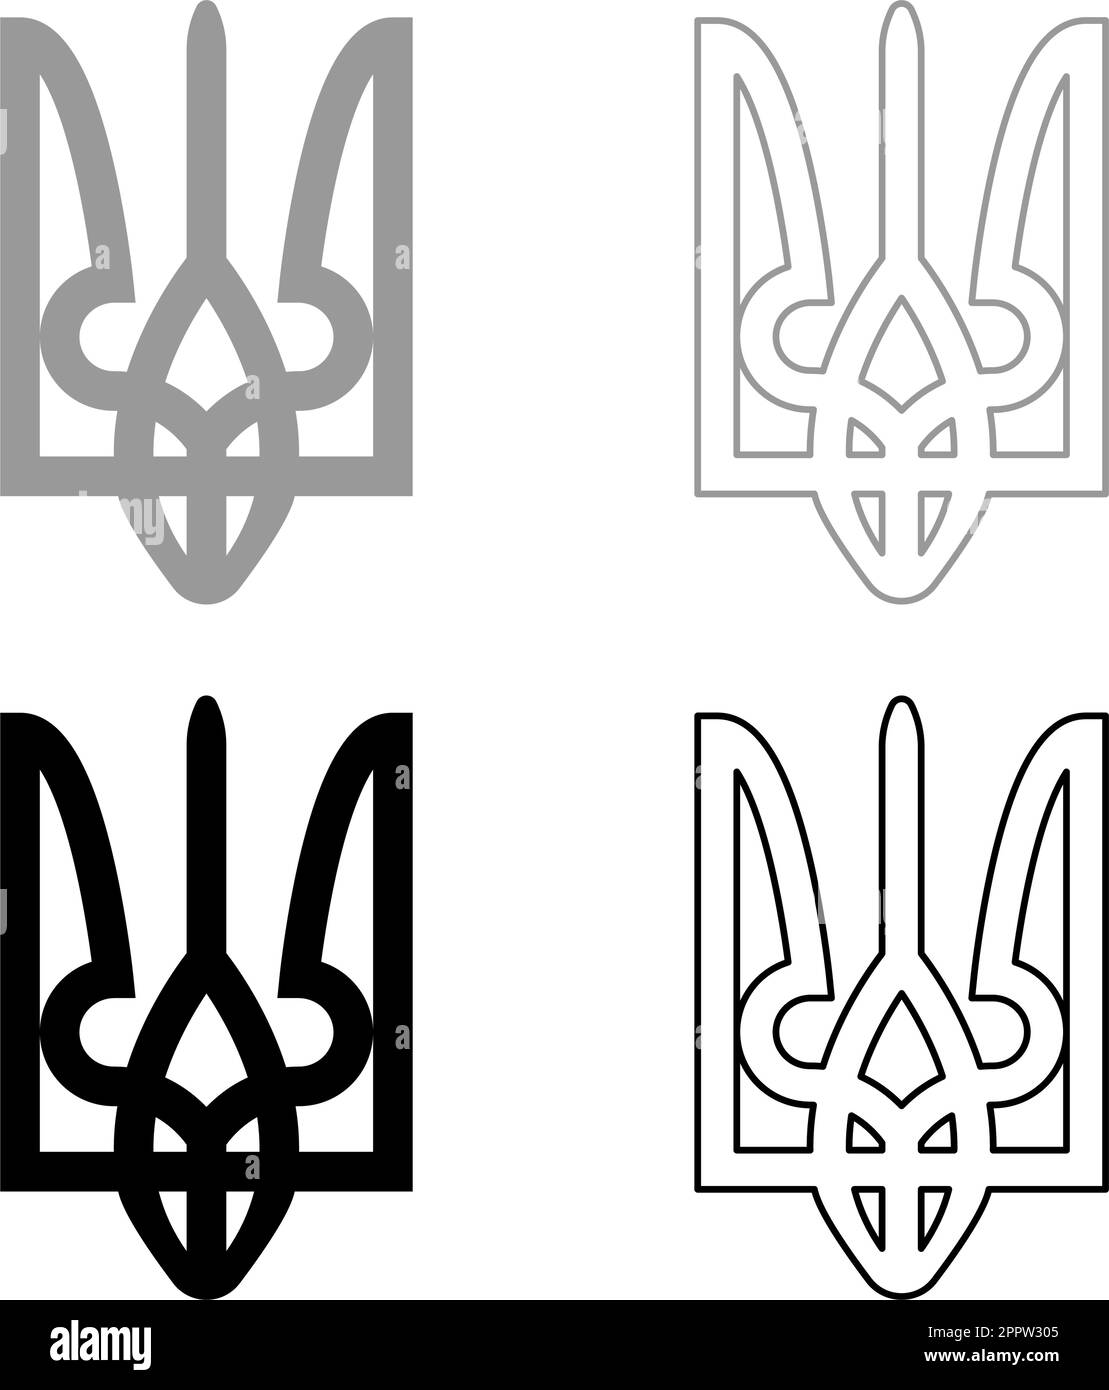 Ukraine coat of arms national emblem seal ukrainian state symbol sign trident tryzub set icon grey black color vector illustration image solid fill outline contour line thin flat style Stock Vector